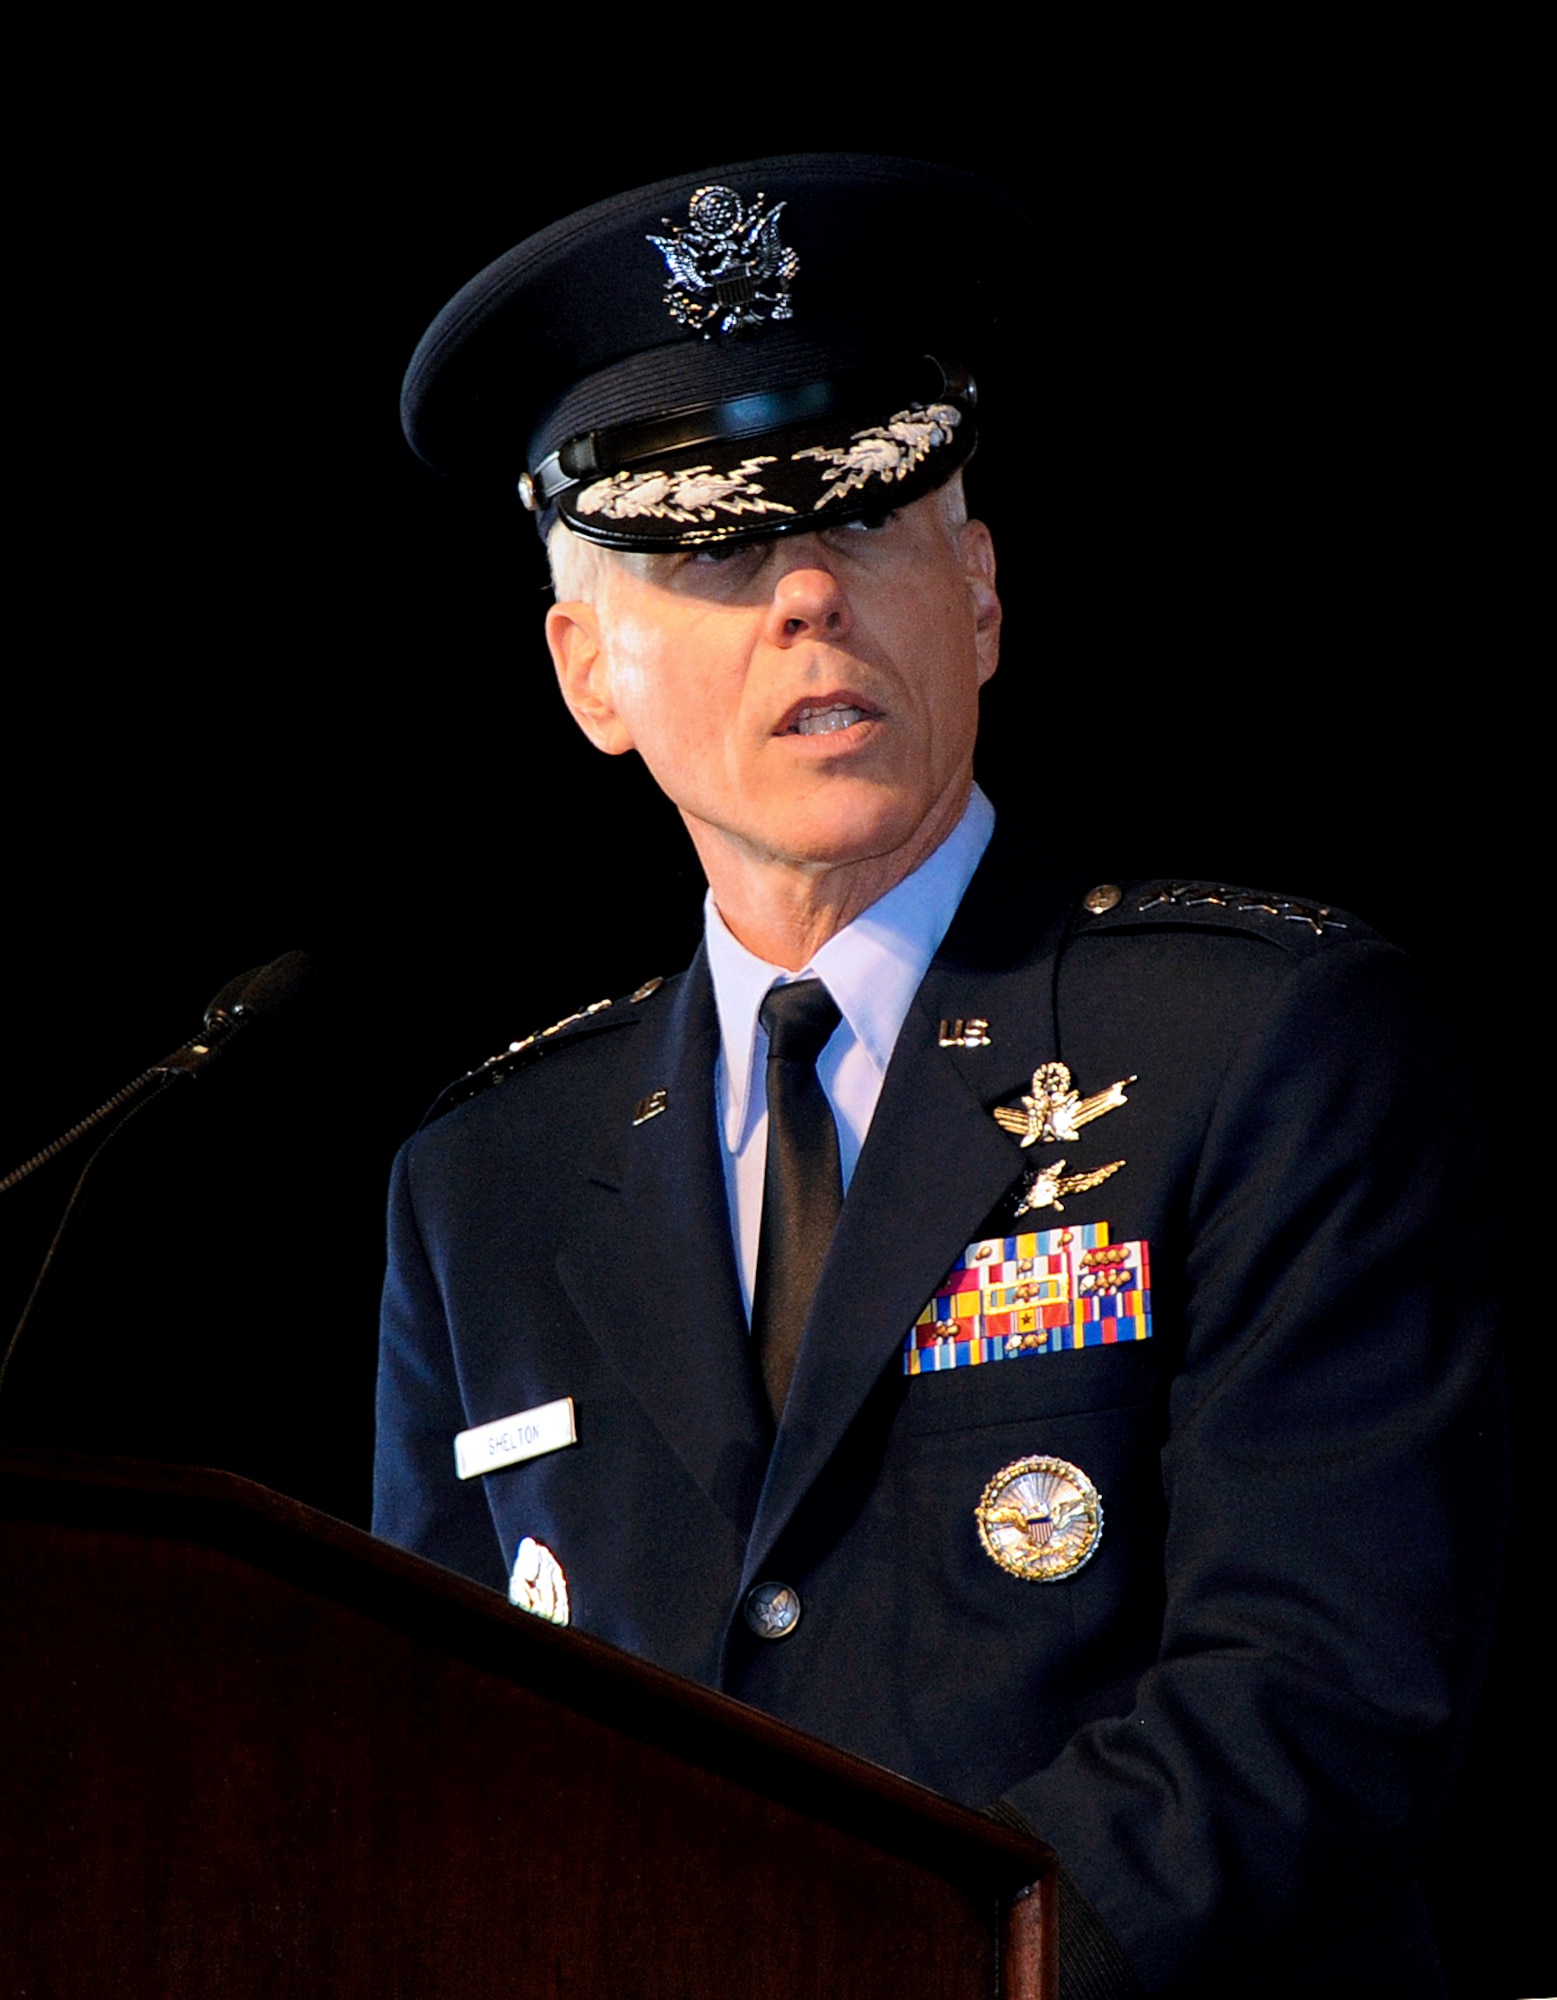 Gen. William L. Shelton, the commander of Air Force Space Command, addresses those present during the AFSPC change of command Jan. 5, 2011, at Peterson Air Force Base, Colo. (U.S. Air Force photo/Duncan Wood)